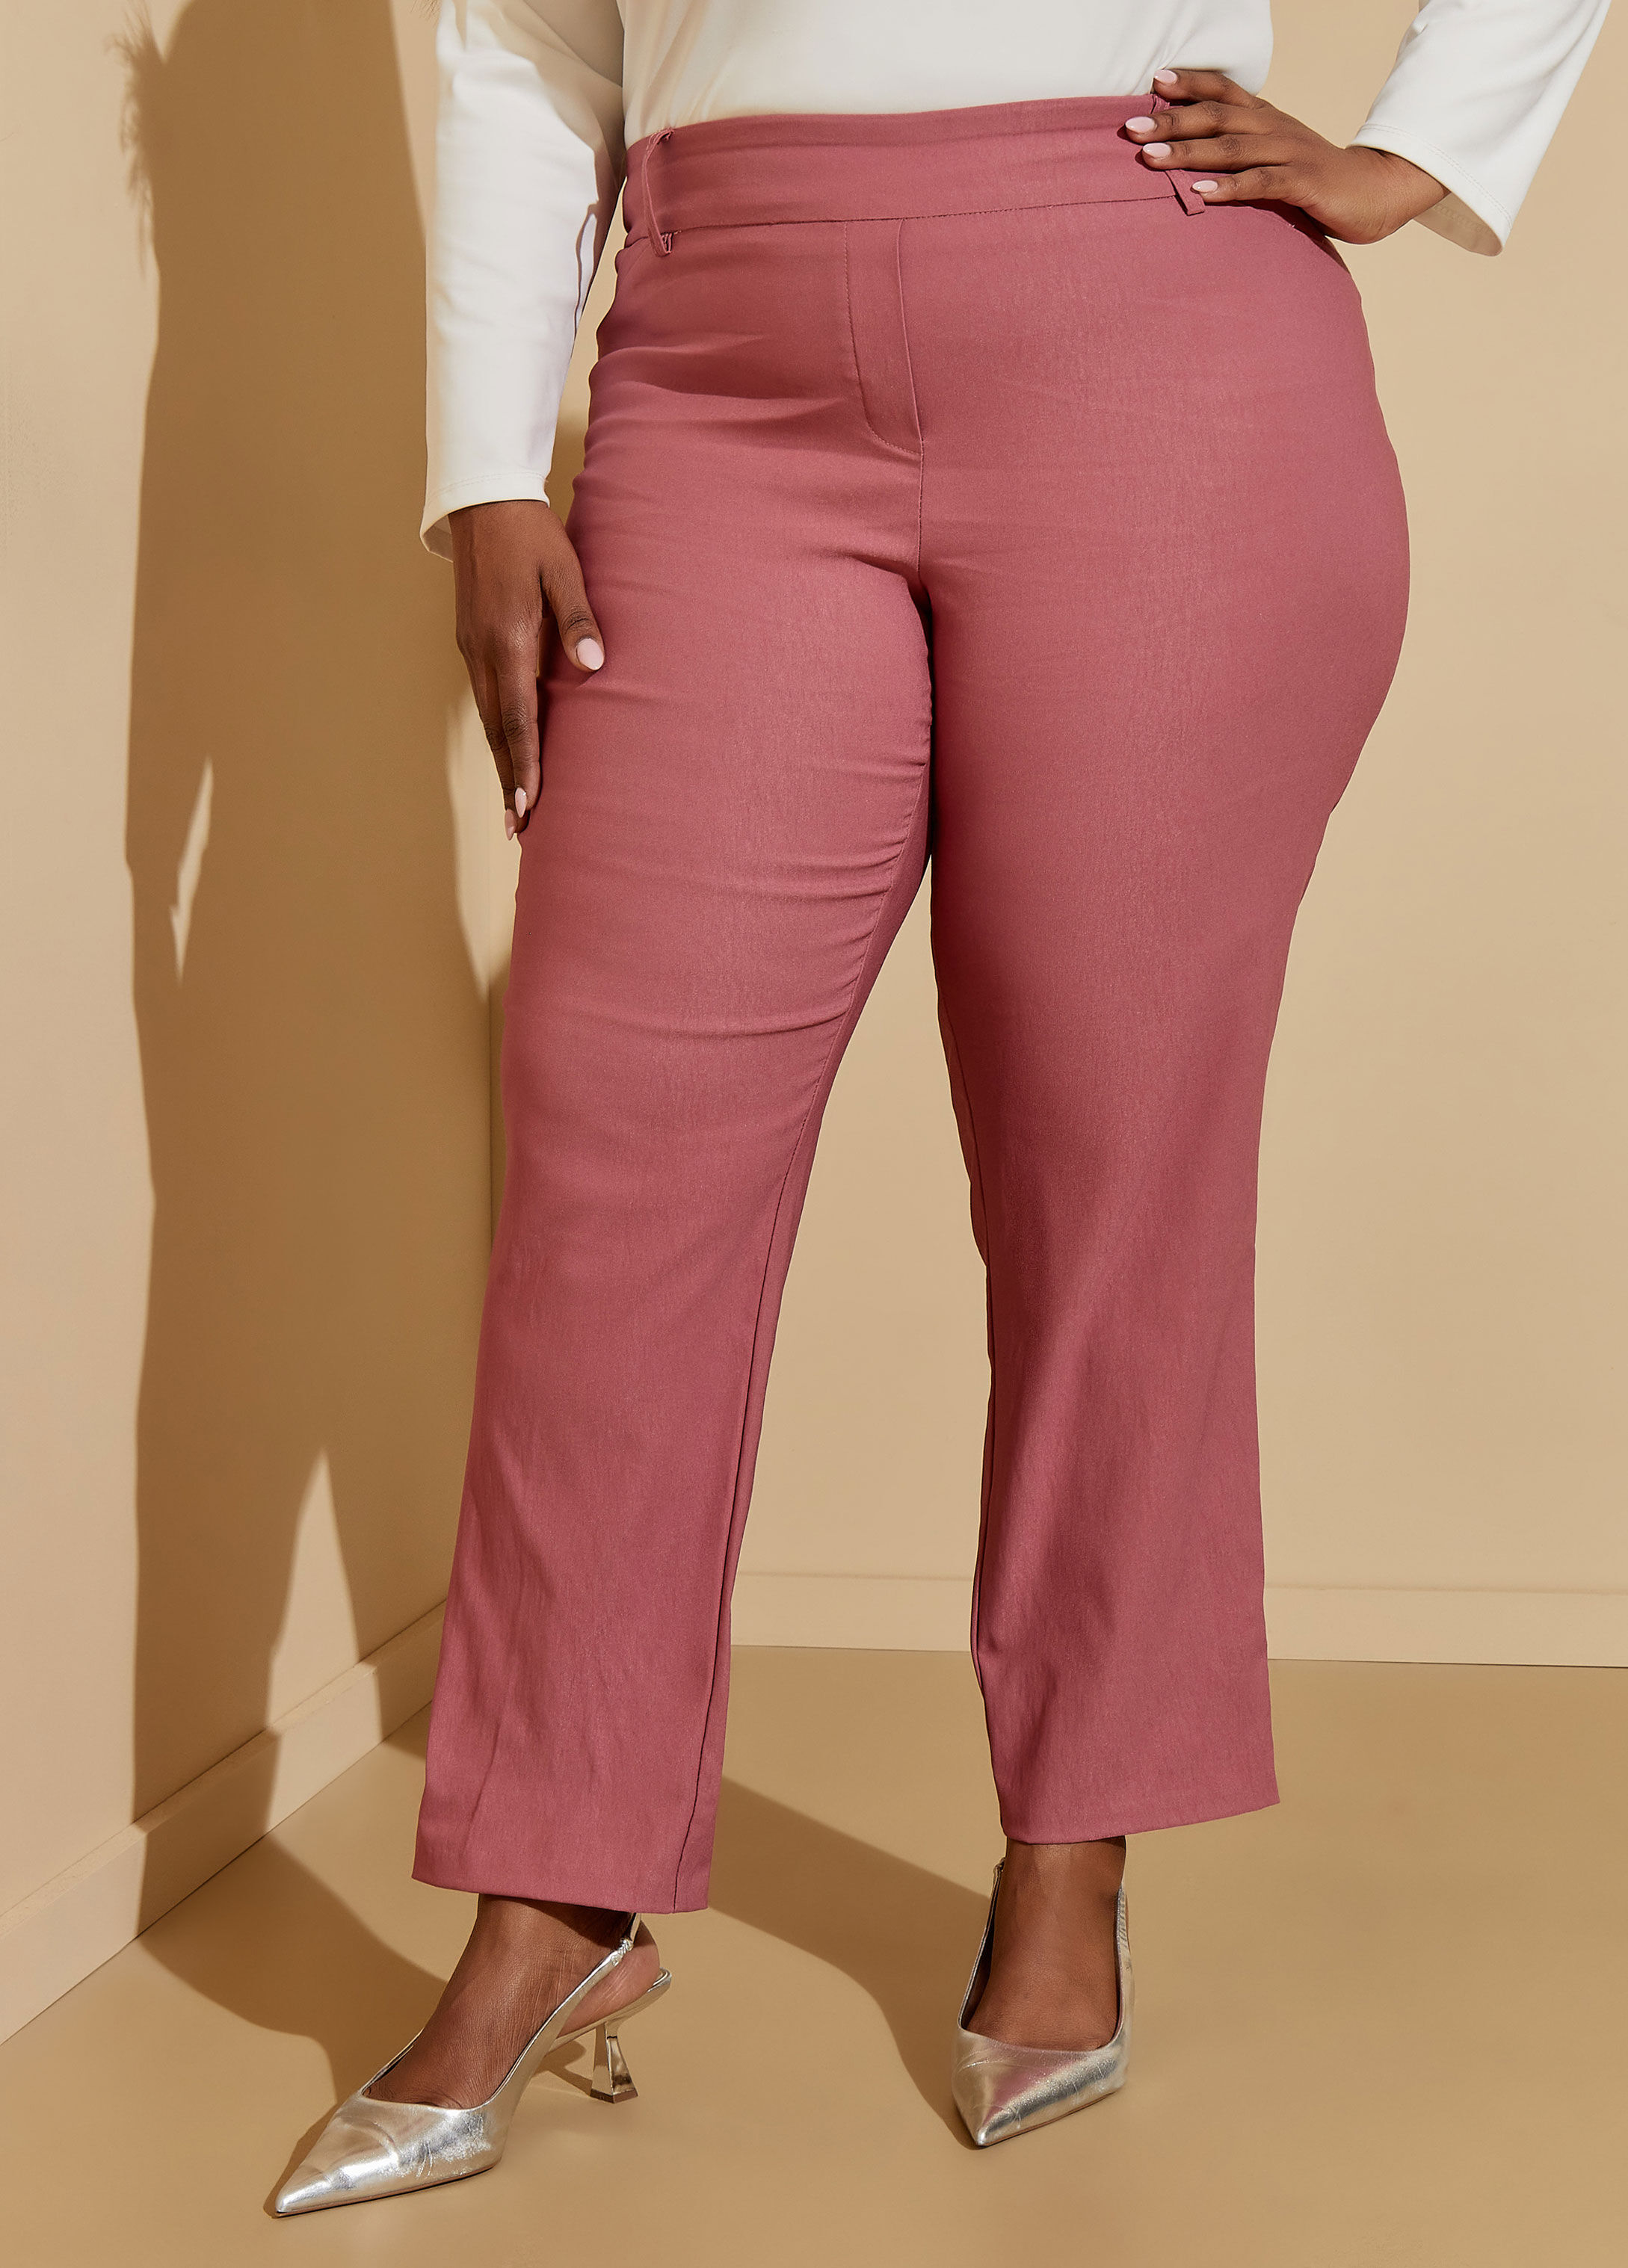 Women's Pink Ankle Jeans | Nordstrom